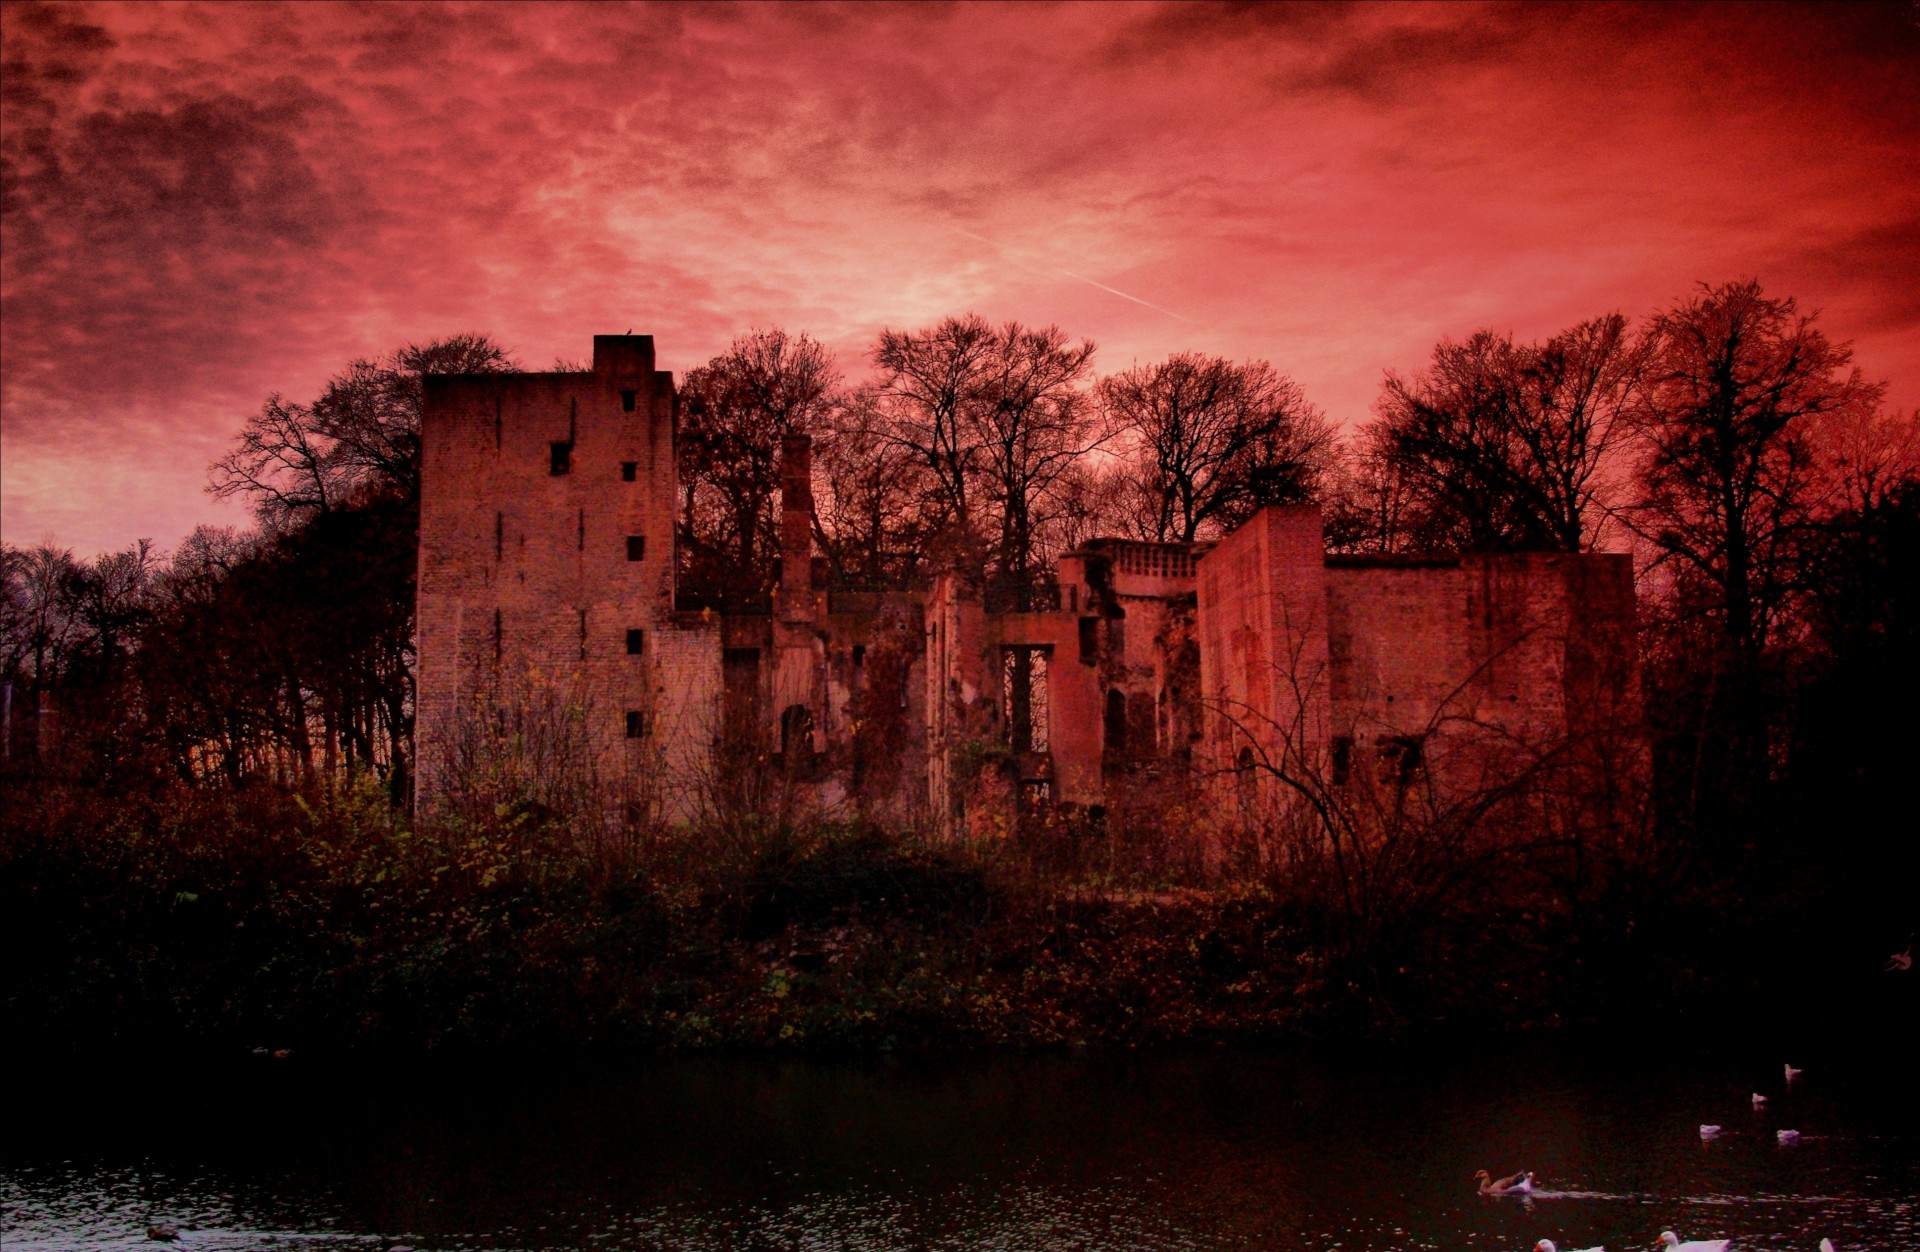 Spooky abandoned castle under a red sky